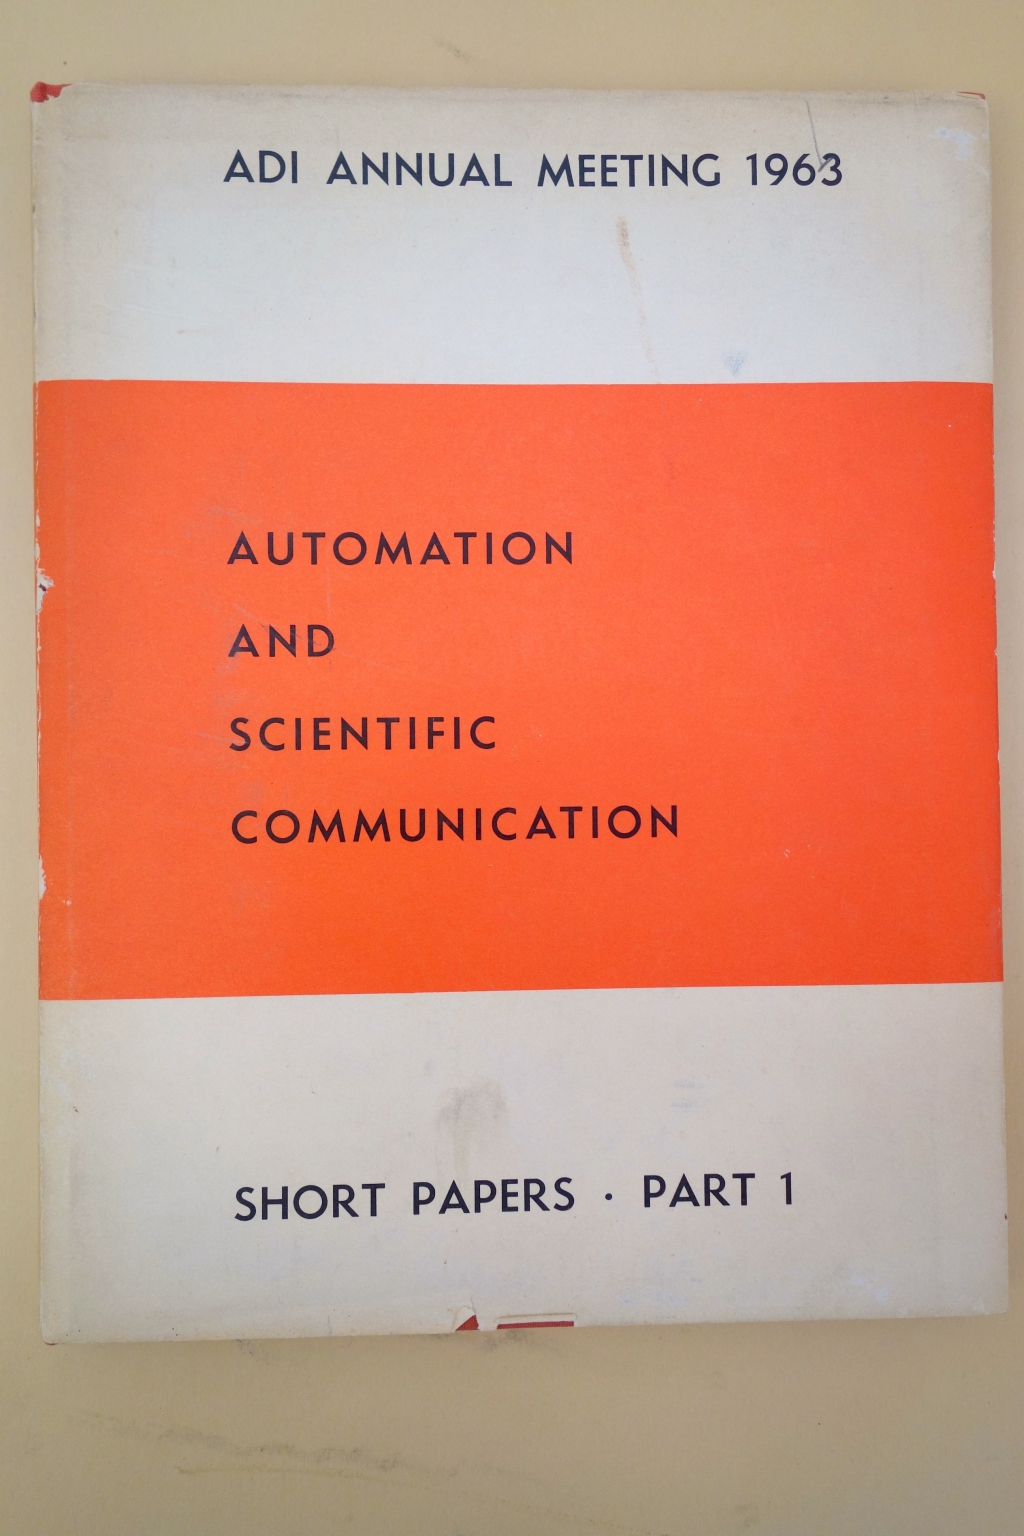 Automation and Scientific Communication dust jacket